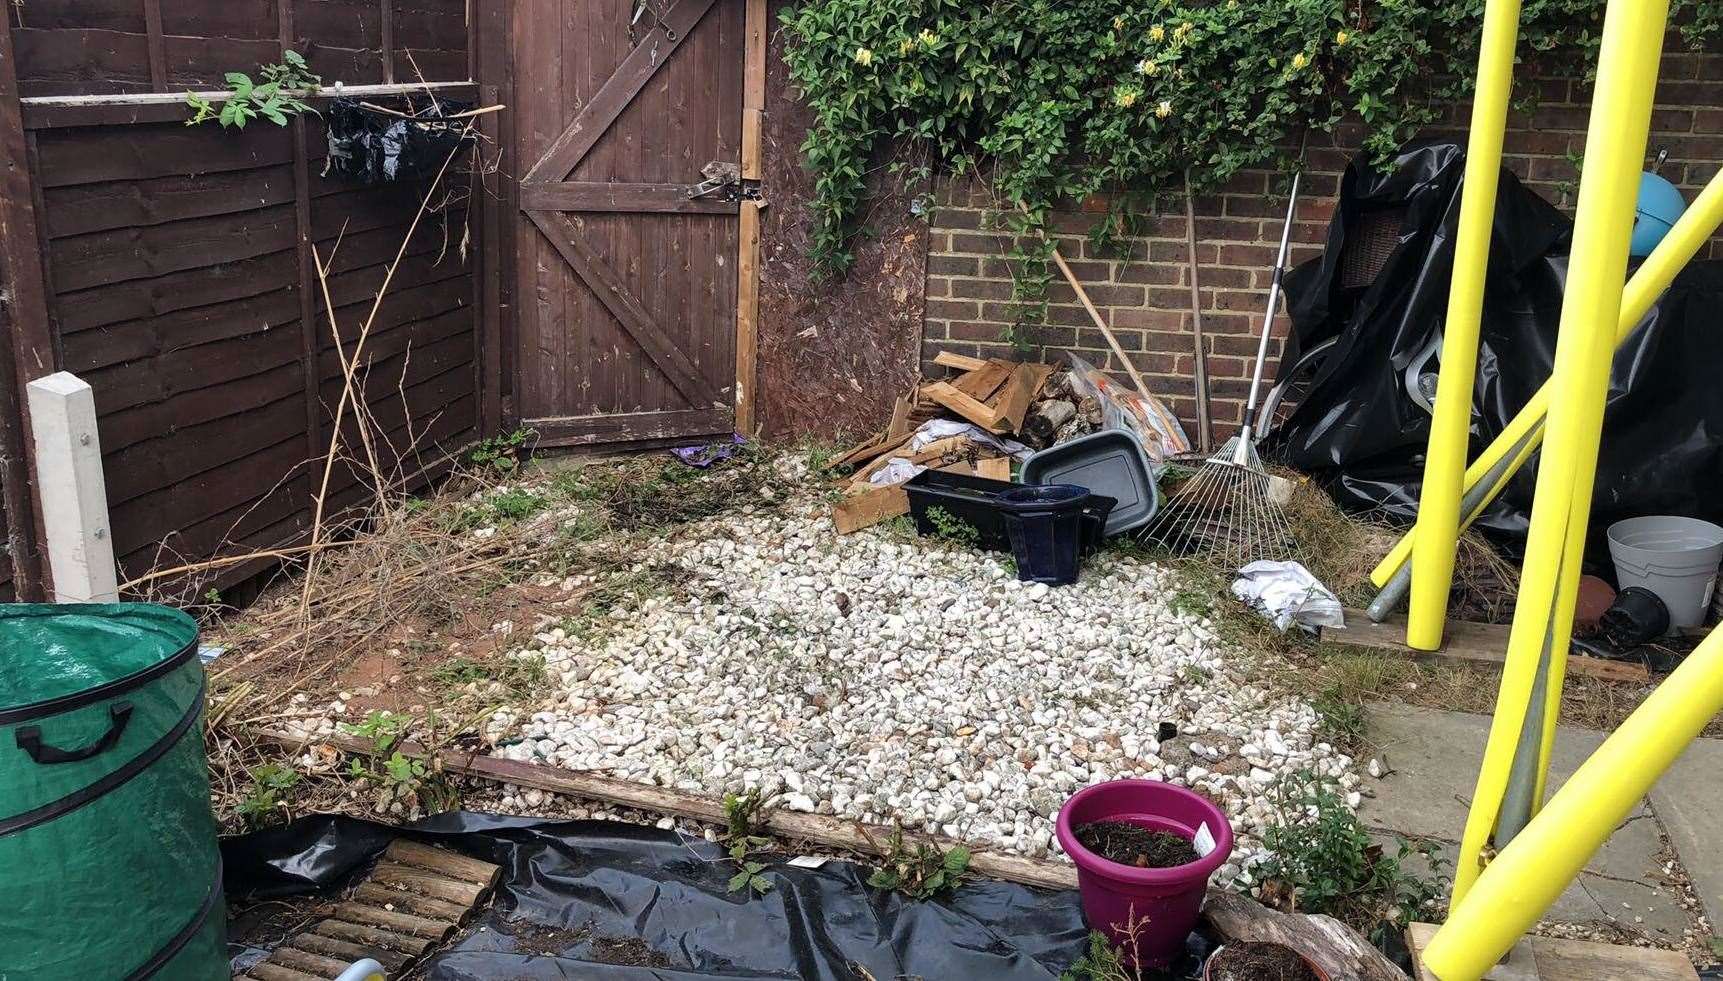 The current condition of her garden